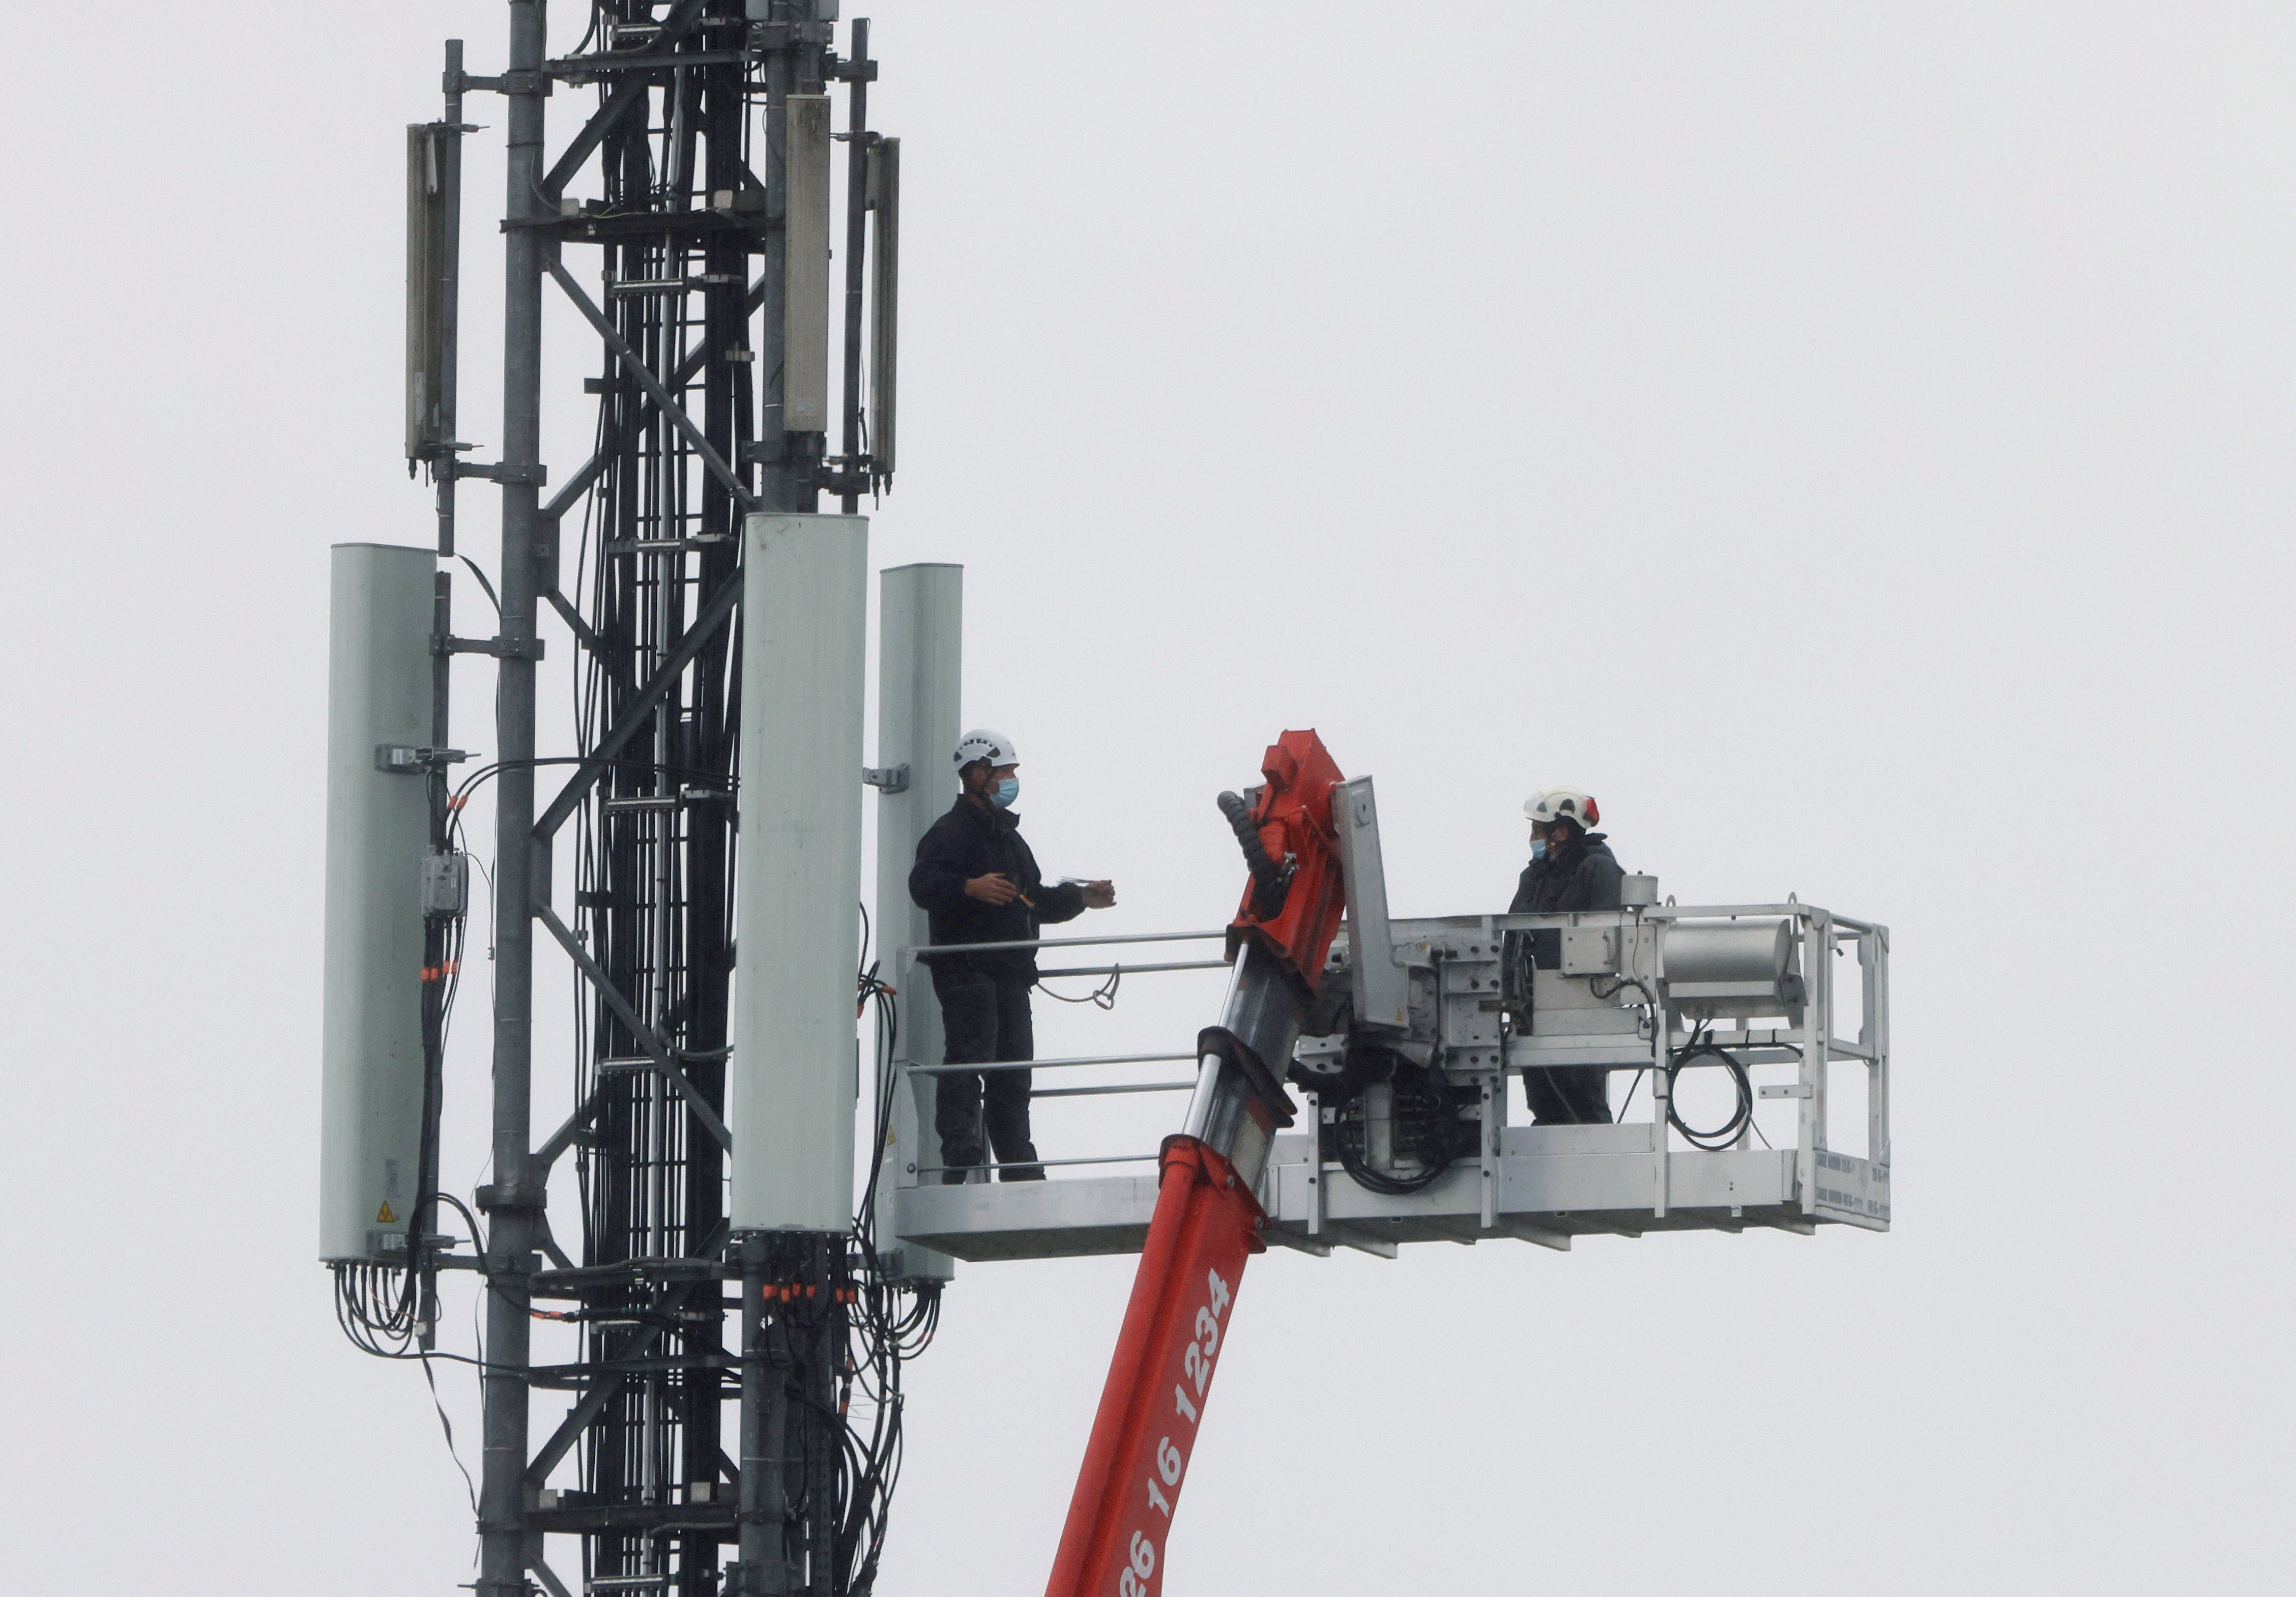 Technicians work at the top of transmitting antennas are seen on a mobile-phone network relay mast in Lambres-lez-Douai, France, September 30, 2020. REUTERS/Pascal Rossignol